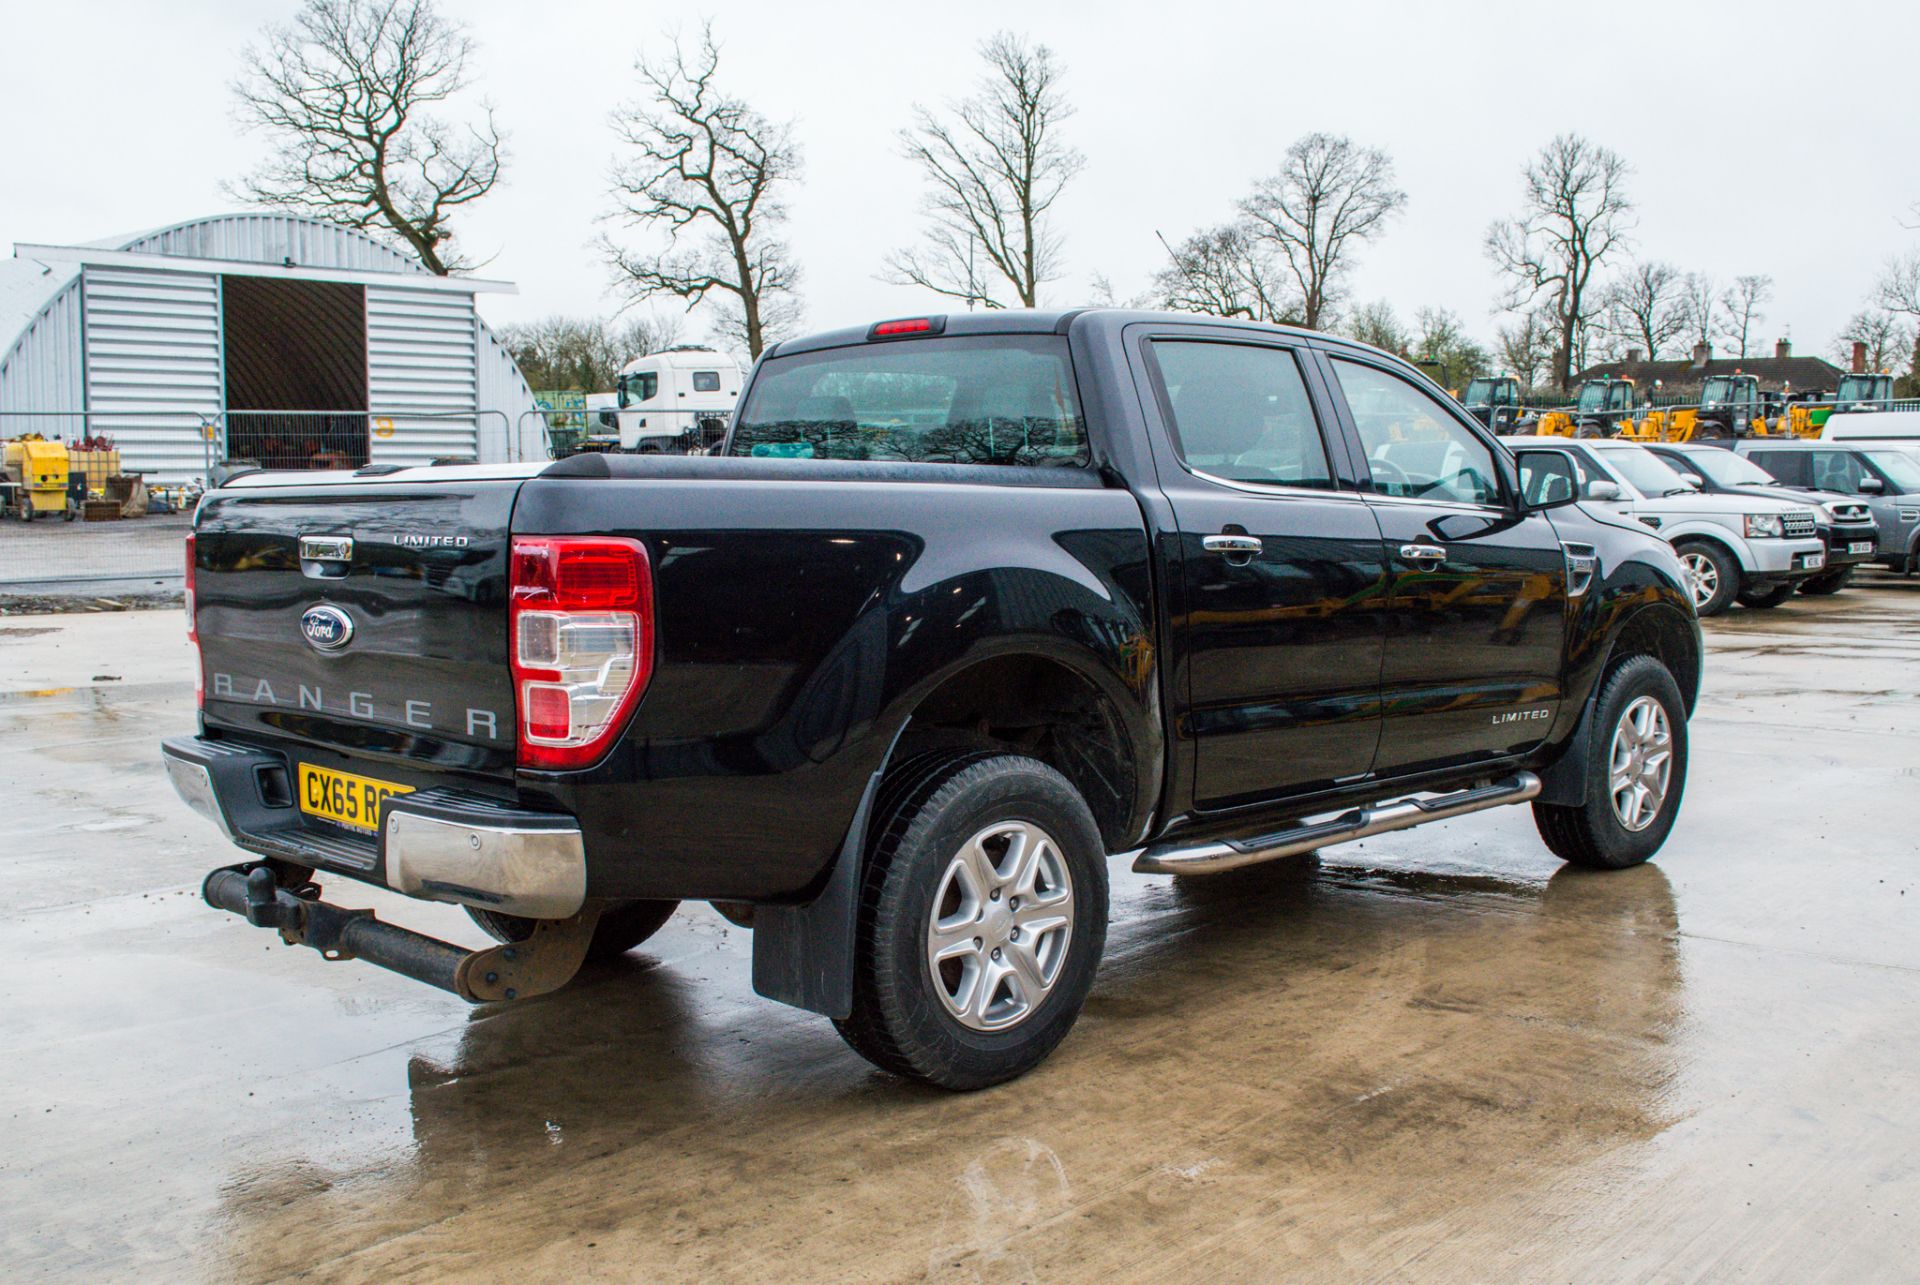 Ford Ranger 2.2 TDCI 150 Limited 4wd automatic double cab pick up - Image 3 of 28